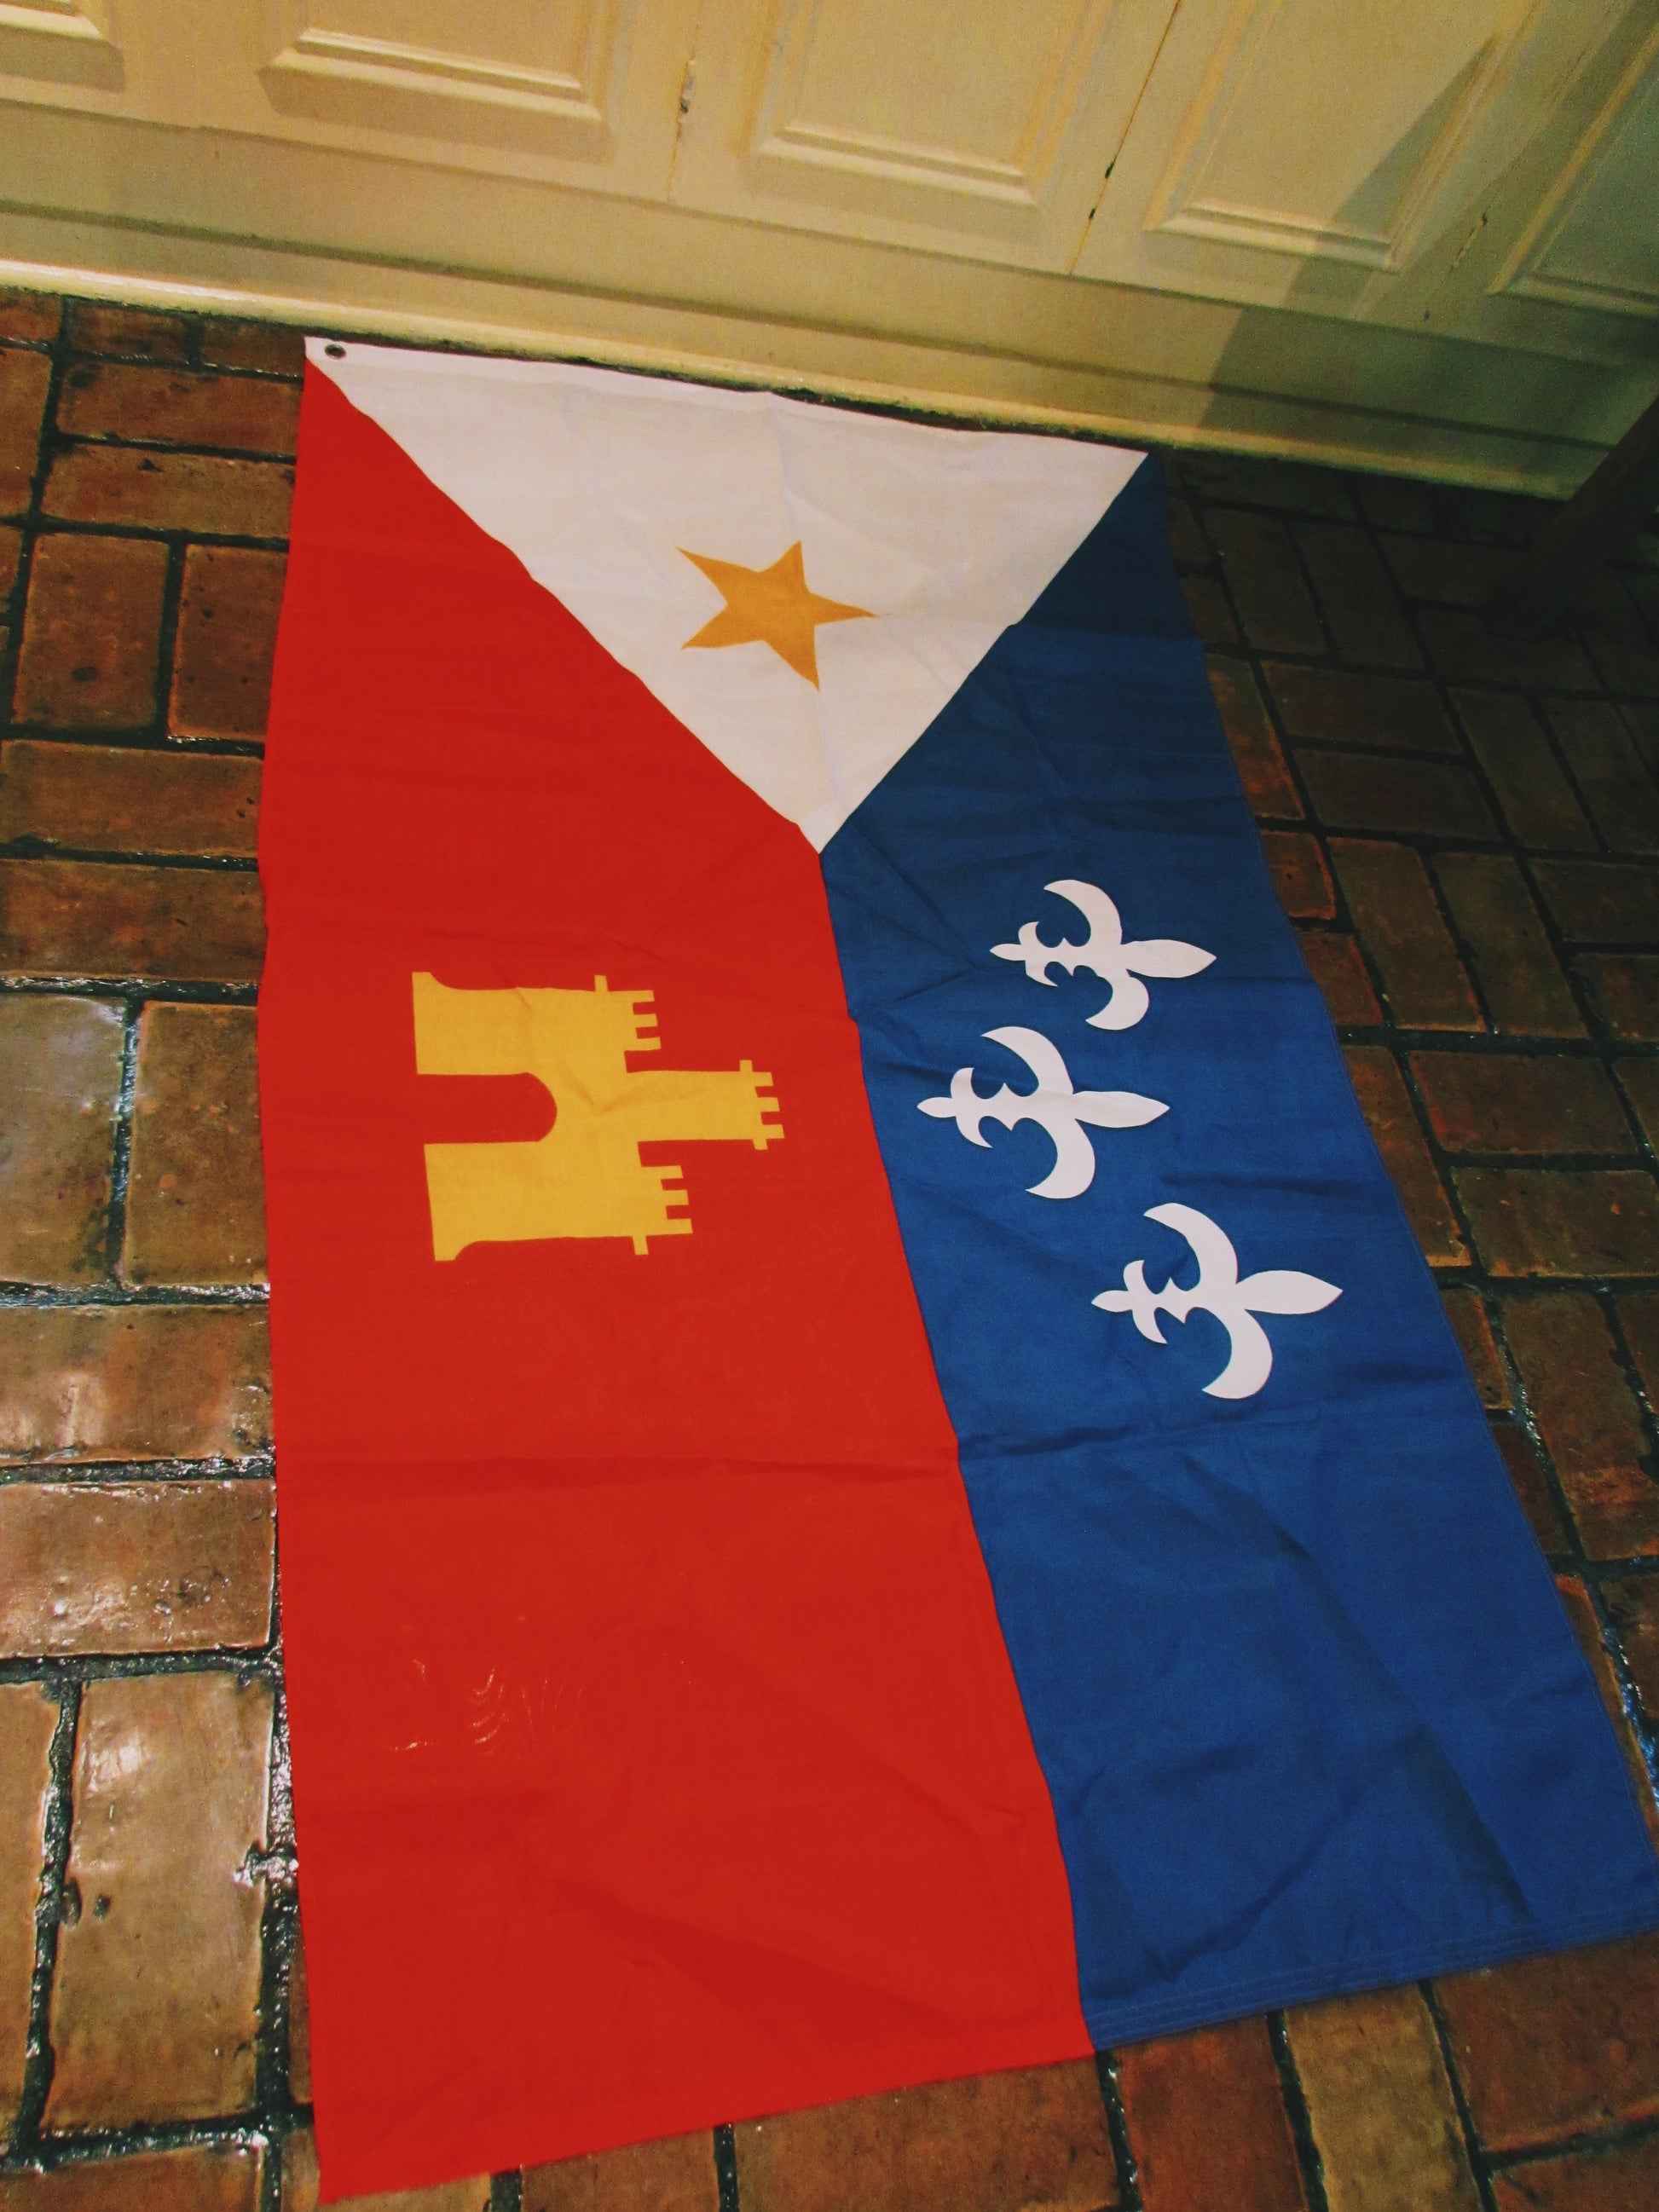 The silver fleur-de-lis on the blue field represents their French heritage. The gold star on the white background respresents the Virgin Mary, patron saint of the Acadians. So this flag is identified with Acadians who migrated to Louisiana. Louisiana made this flag the offical flag of the Acadiana area in 1974.